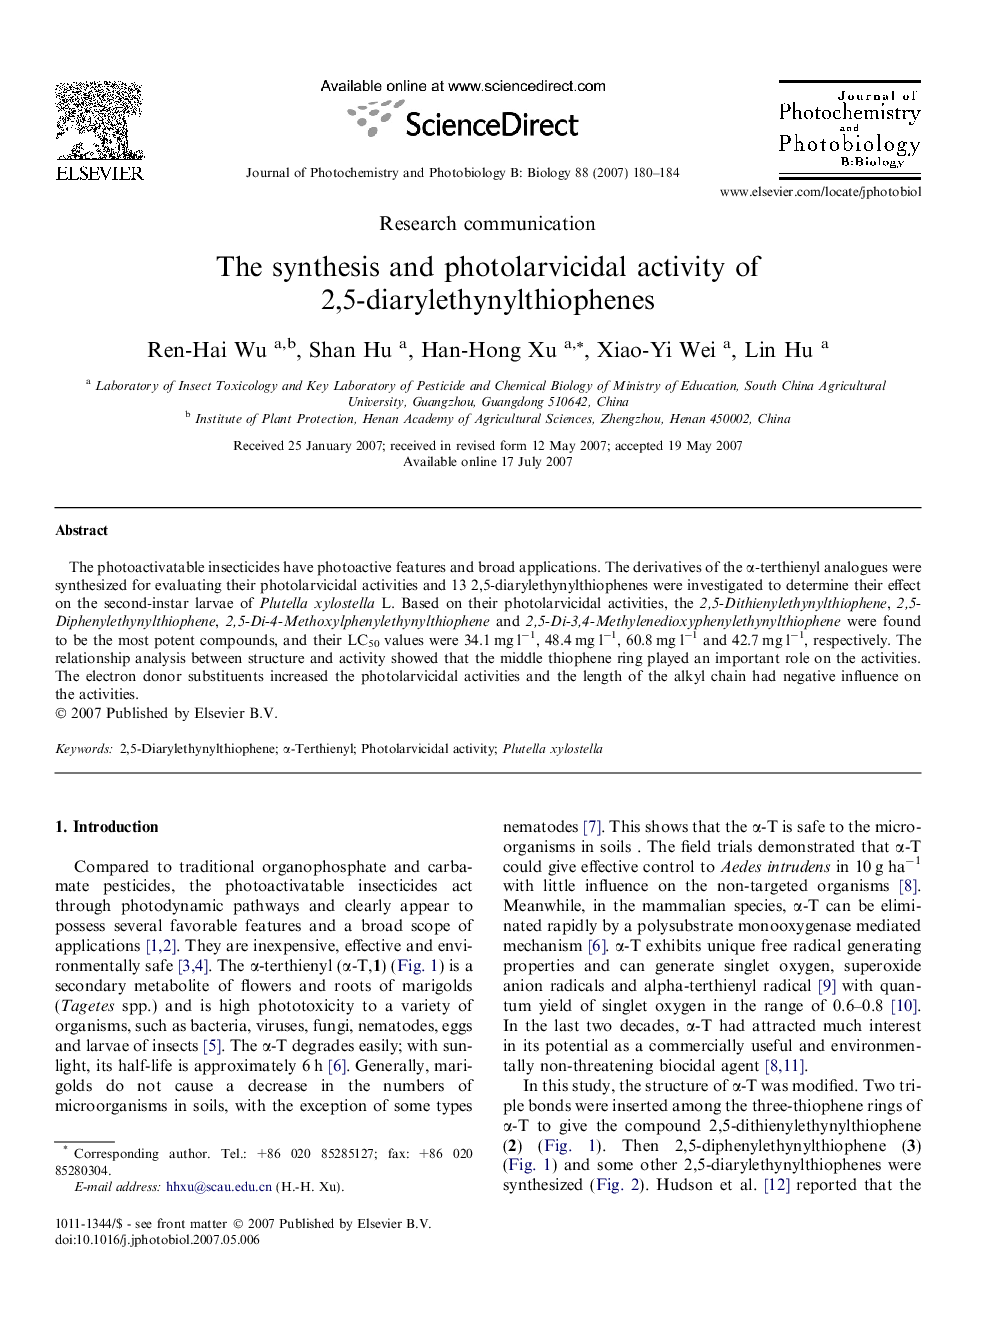 The synthesis and photolarvicidal activity of 2,5-diarylethynylthiophenes